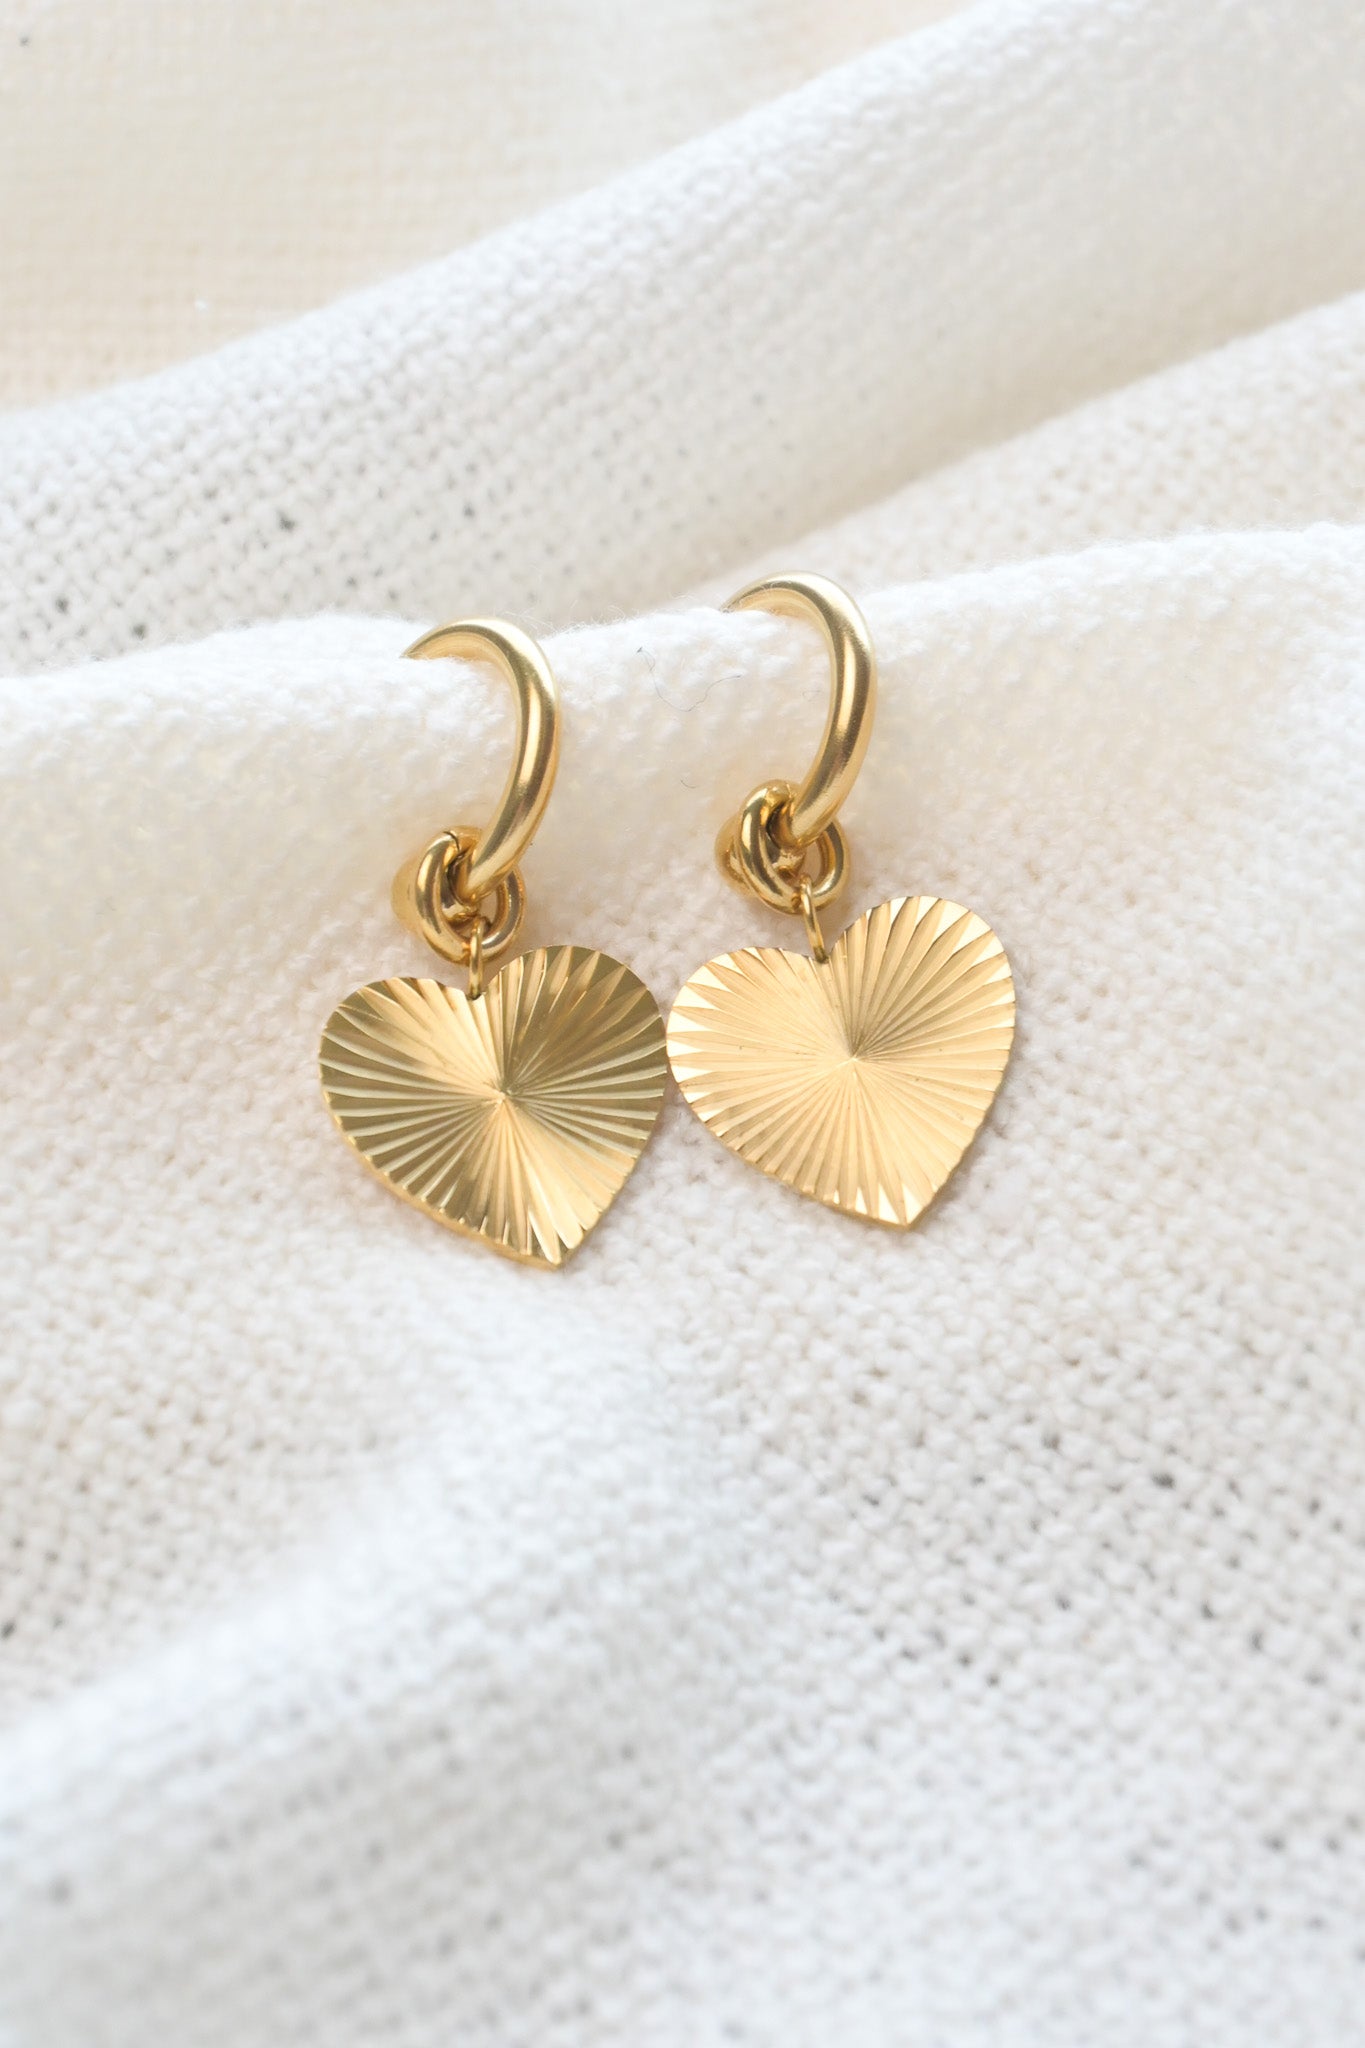 Heart earring gold plated hypoallergenic